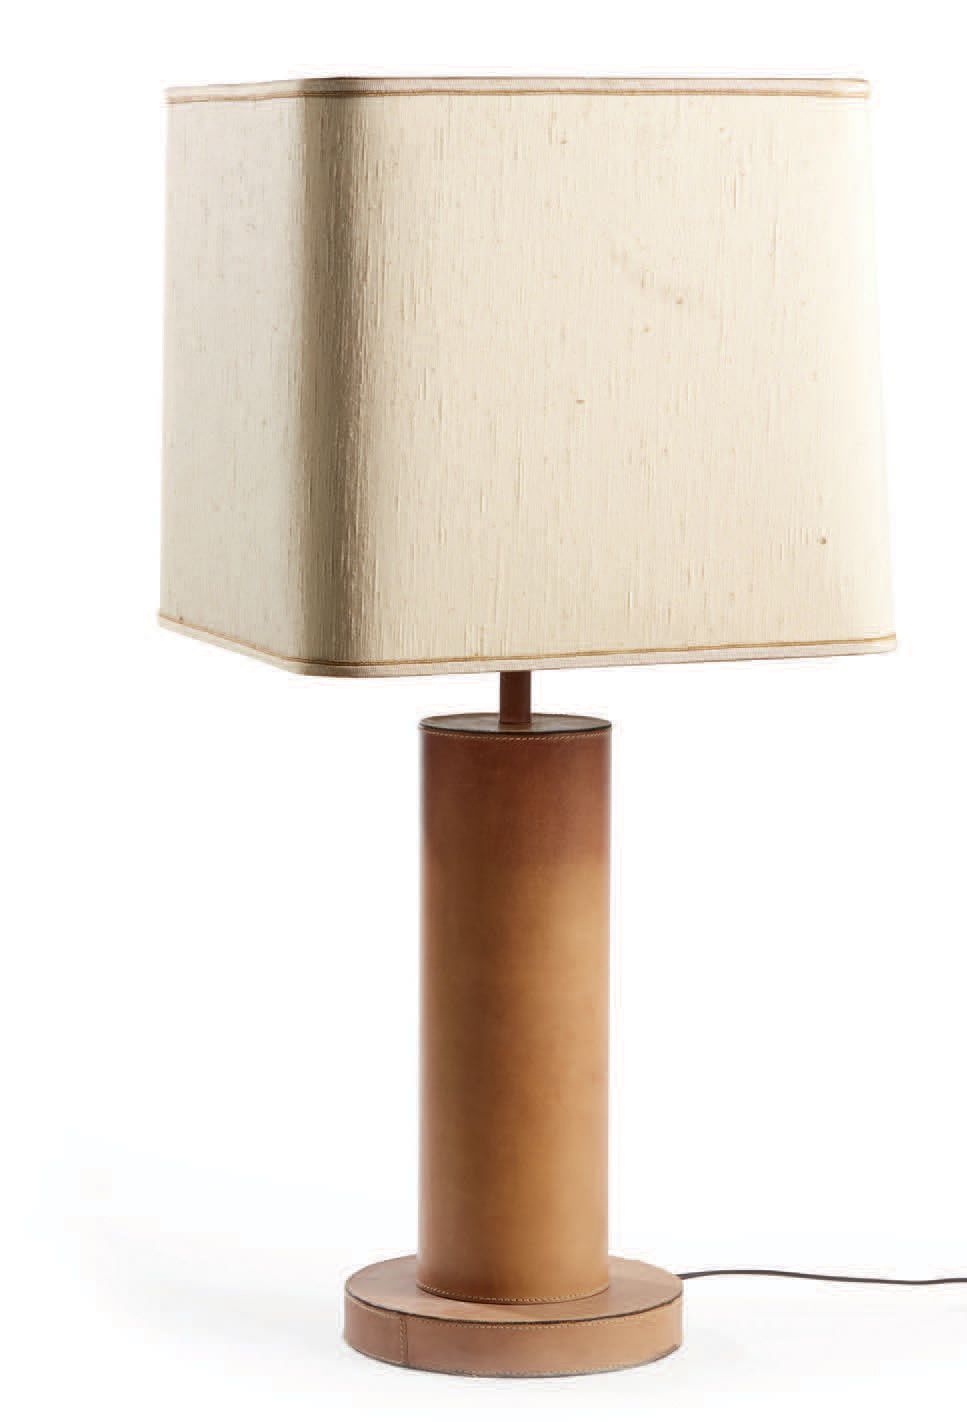 TRAVAIL FRANÇAIS Desk lamp, cylindrical shaft sheathed in fawn leather
H : 45 cm